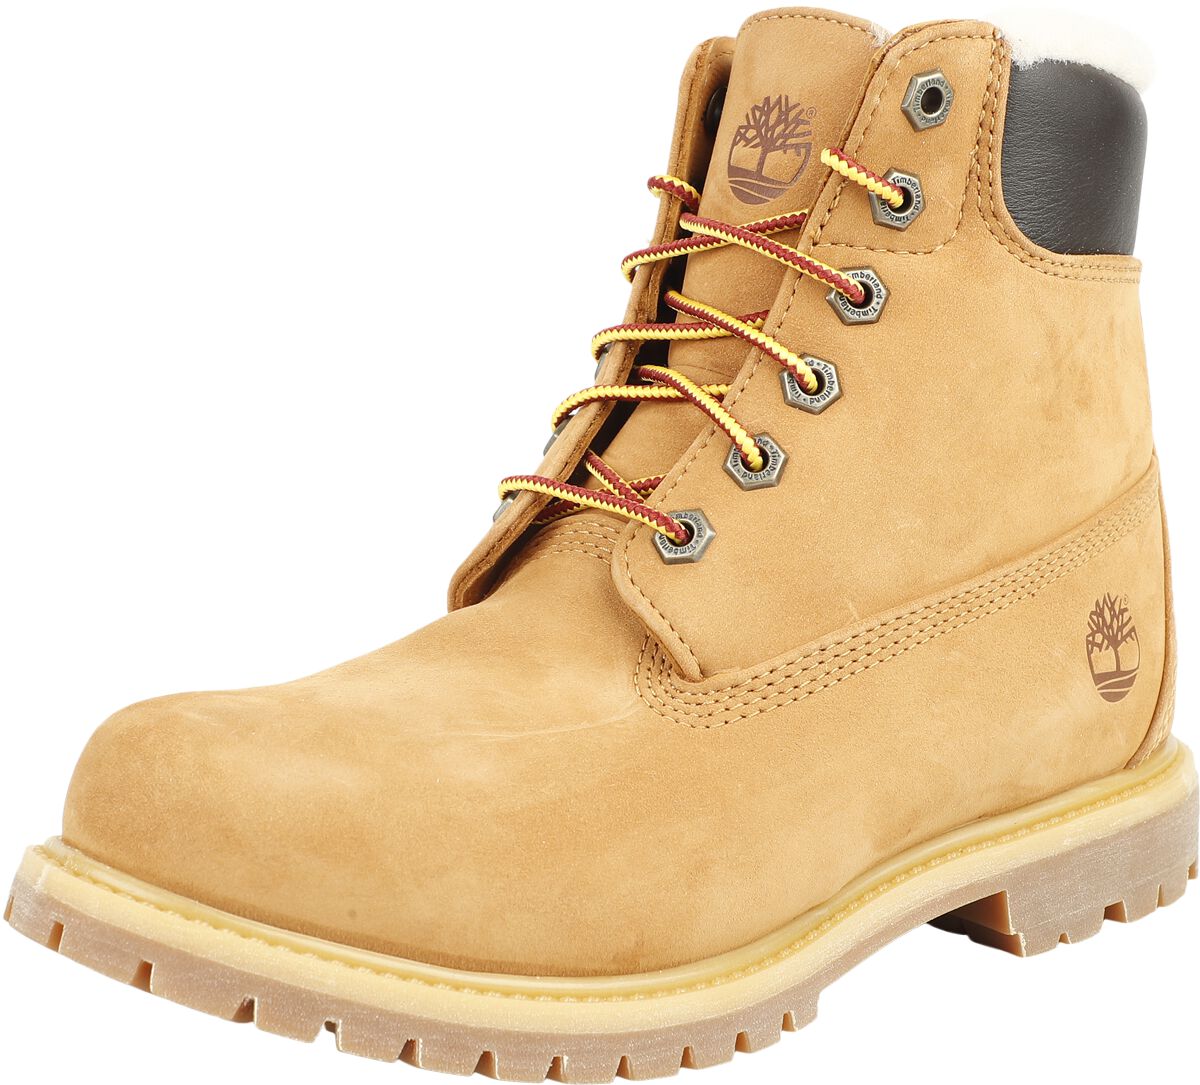 Timberland 6 Inch Premium Shearling Lined WP Boot Boot braun in EU39 von Timberland